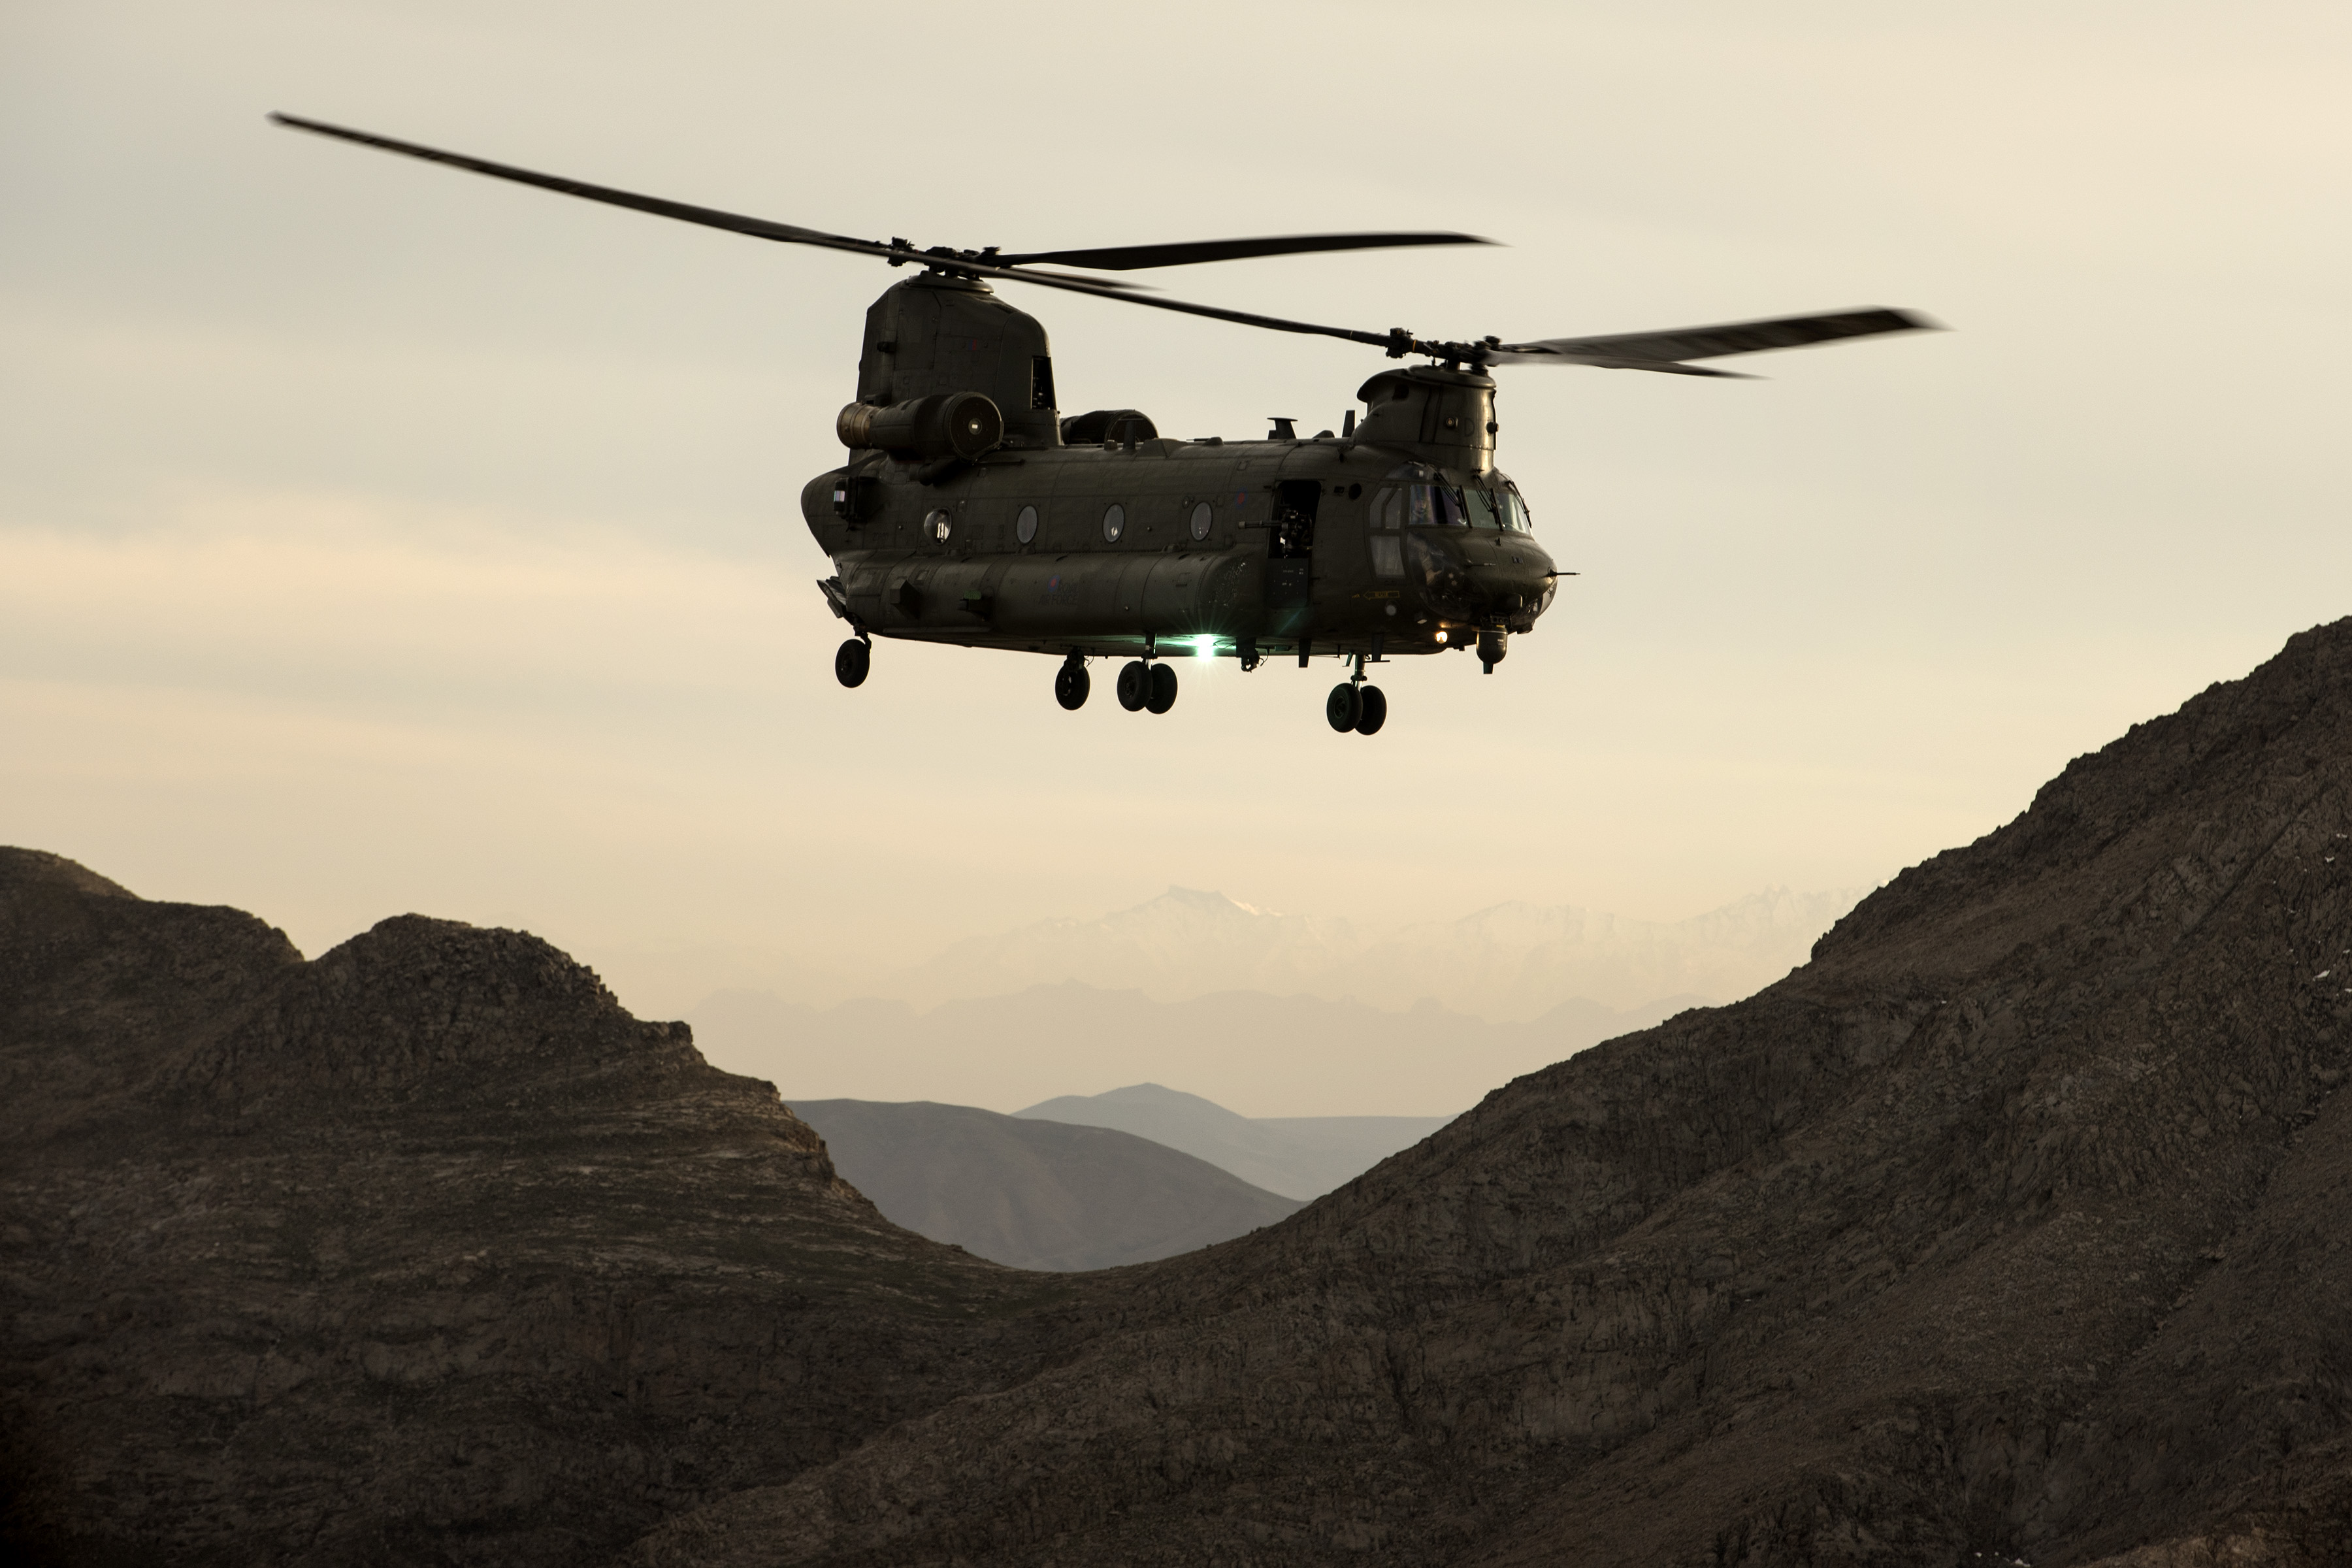  pequeñas curiosidades  - Página 19 An_RAF_Chinook_helicopter_in_silhouette%2C_flying_over_Afghanistan._MOD_45158739